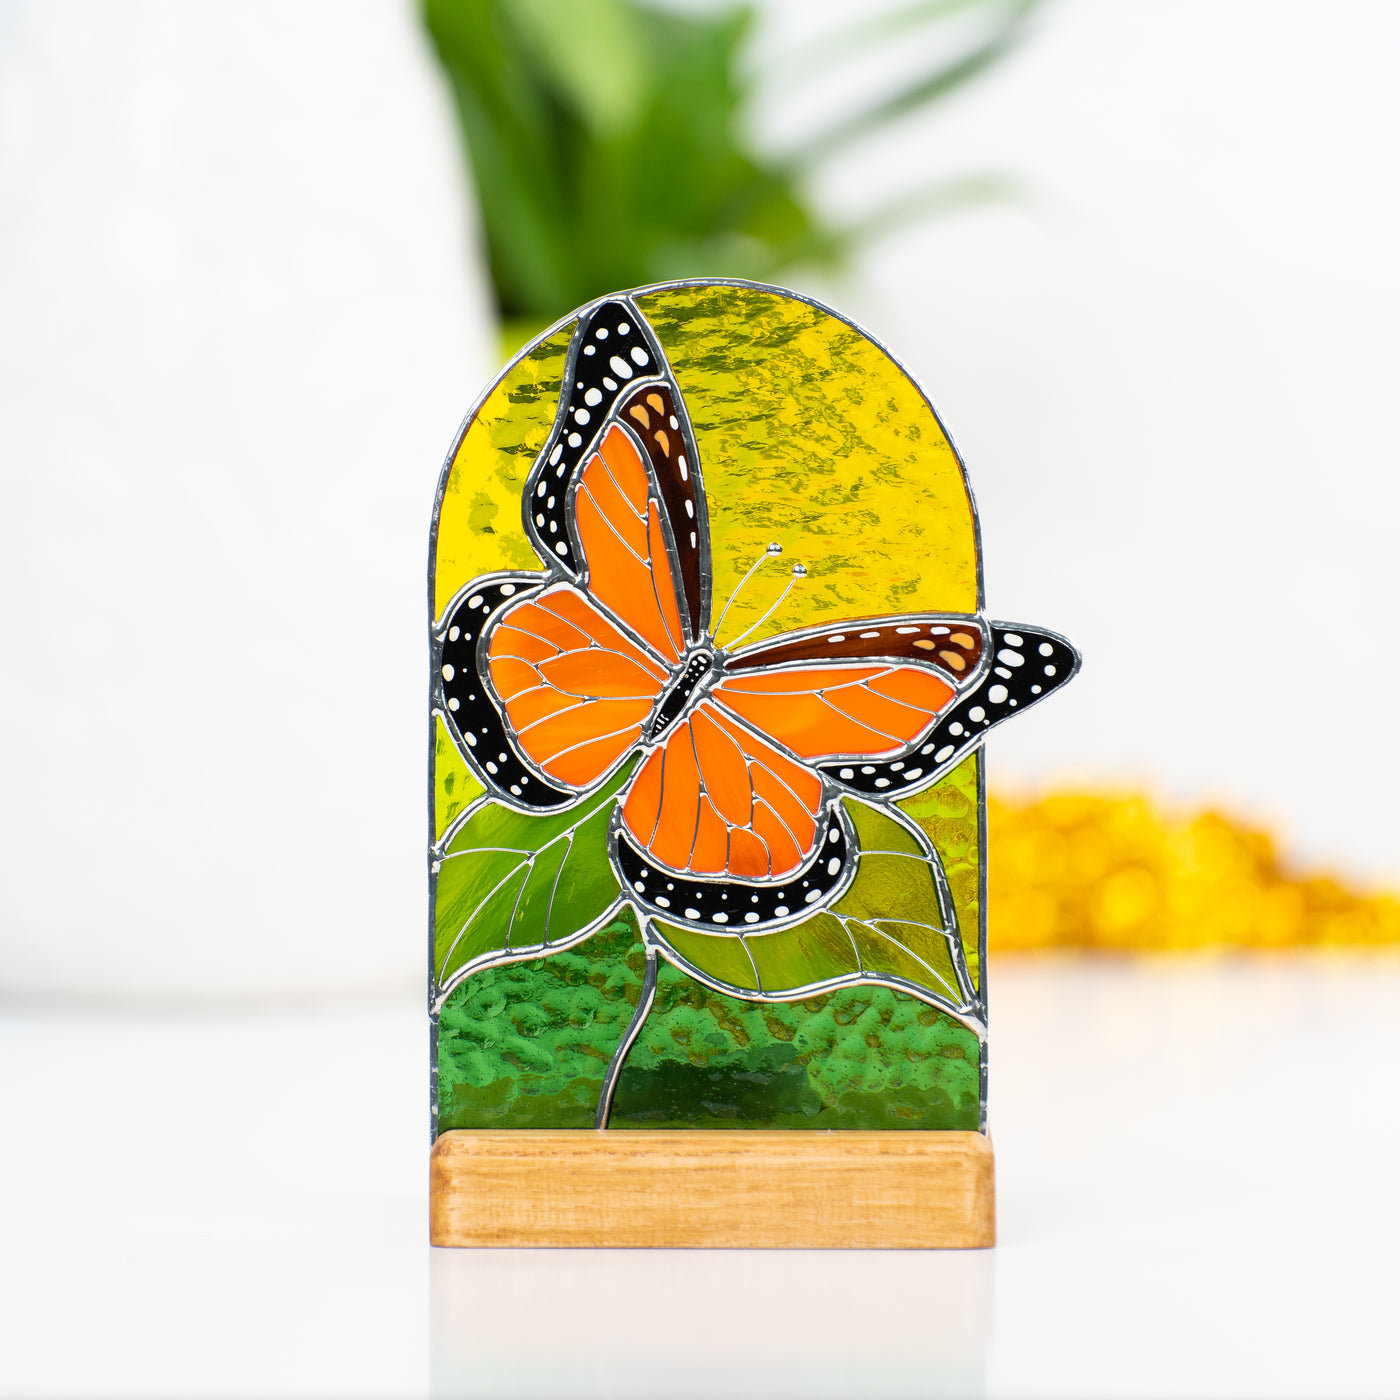 Stained glass panel in a wooden base with the candle behind depicting monarch butterfly